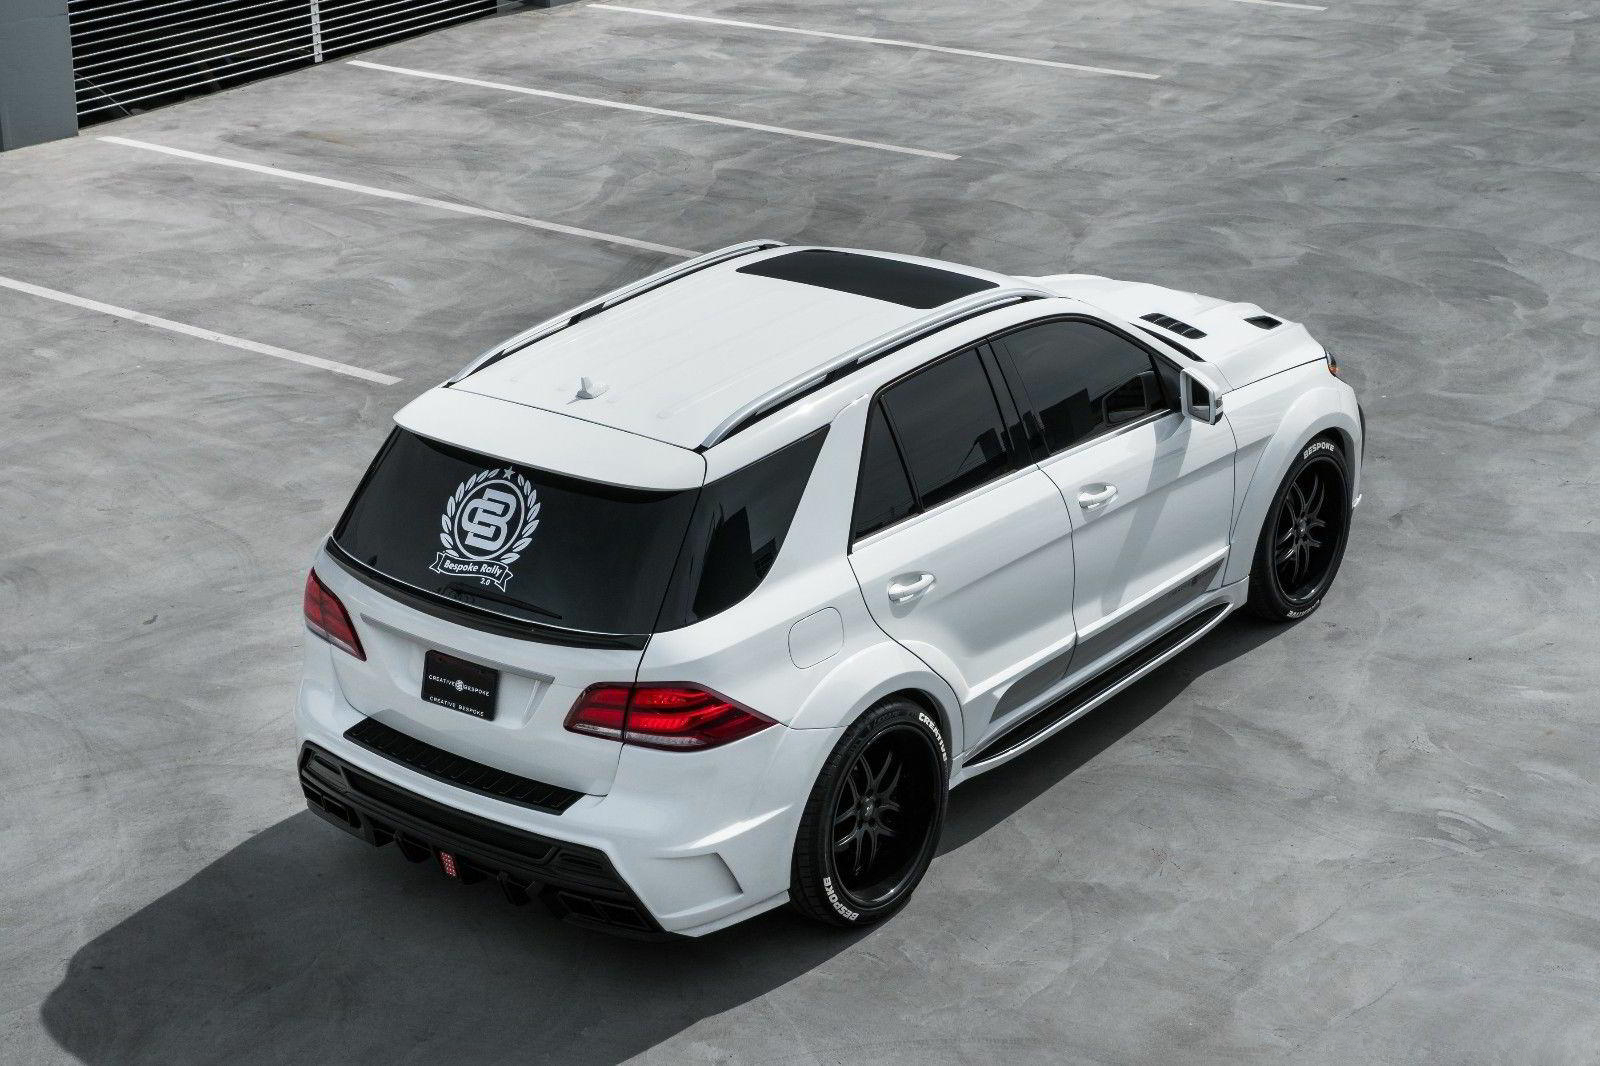 Check our price and buy a Renegade Design body kit for Mercedes-Benz GLE W166!